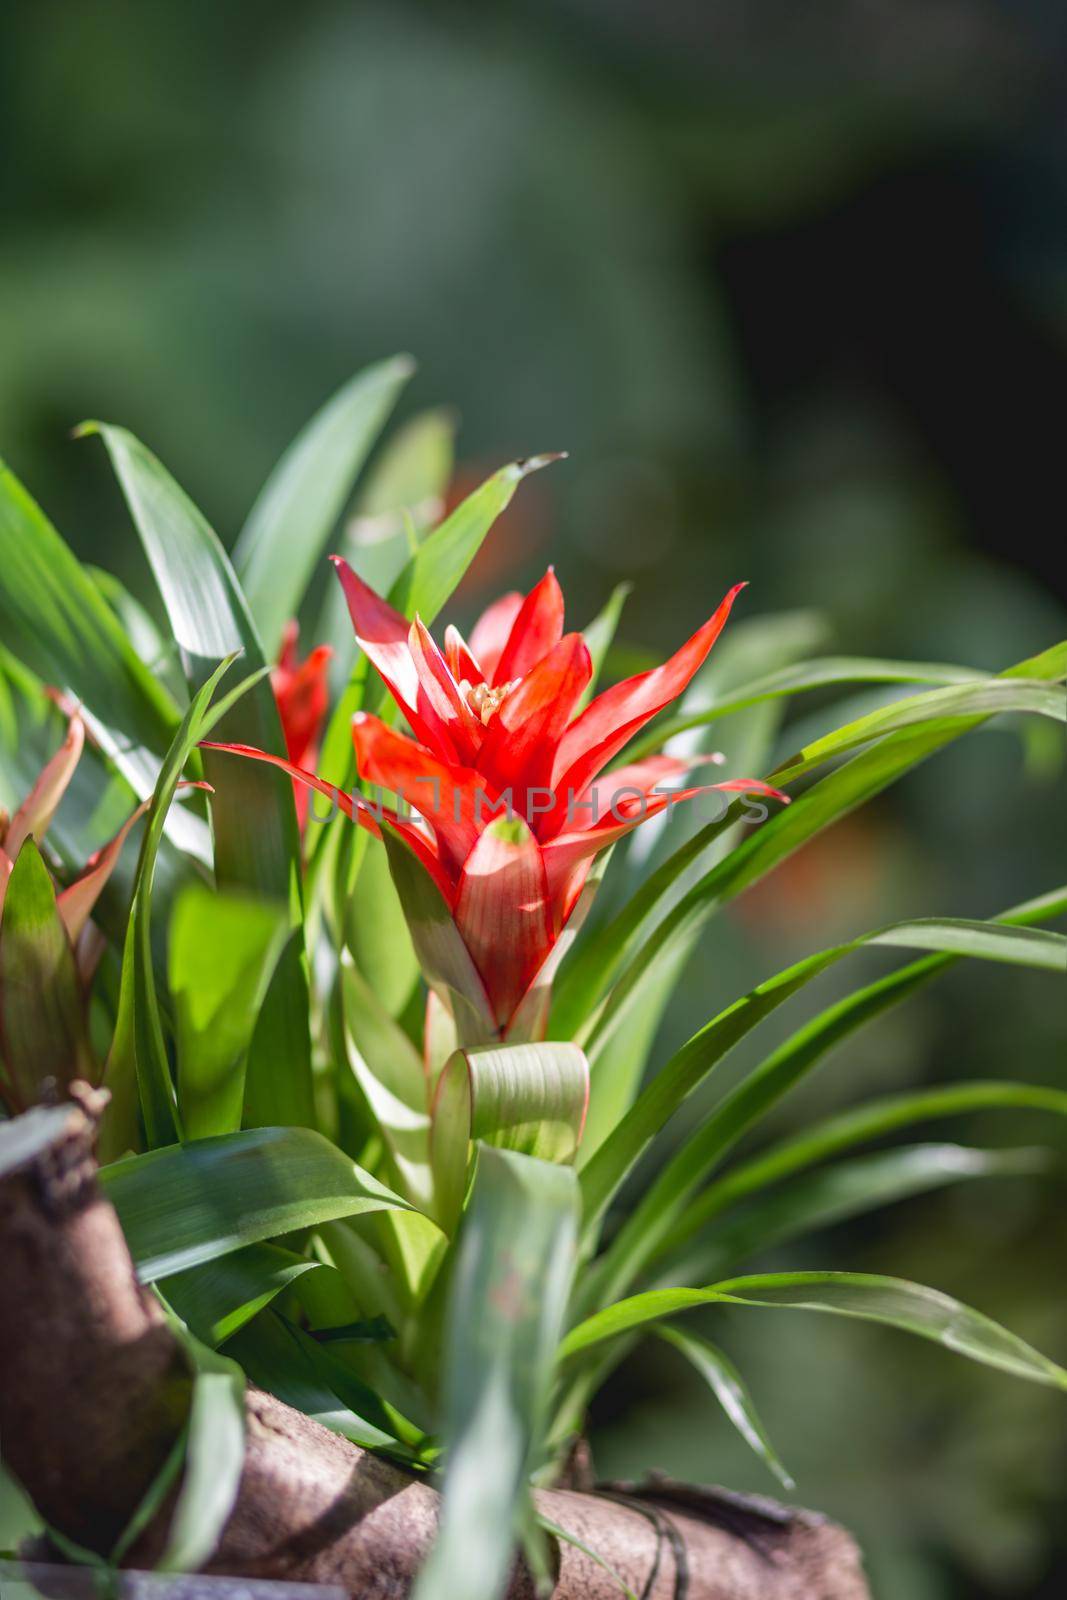 Guzmania or tufted airplant. Bright and colorful flower in bloom. by aksenovko